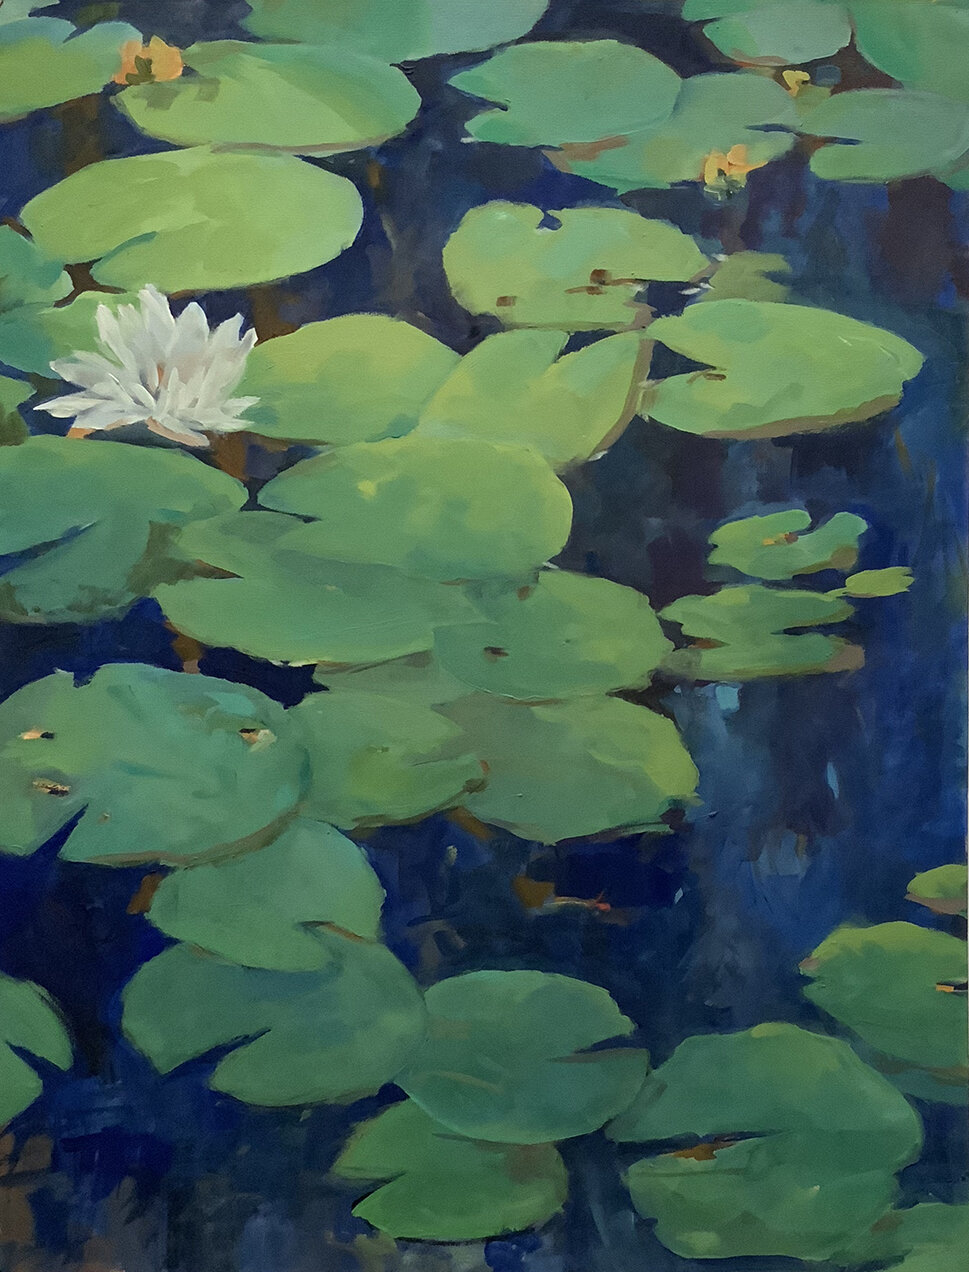  American Lotus 19 x 25 Oil on Ingres laid color paper $225 